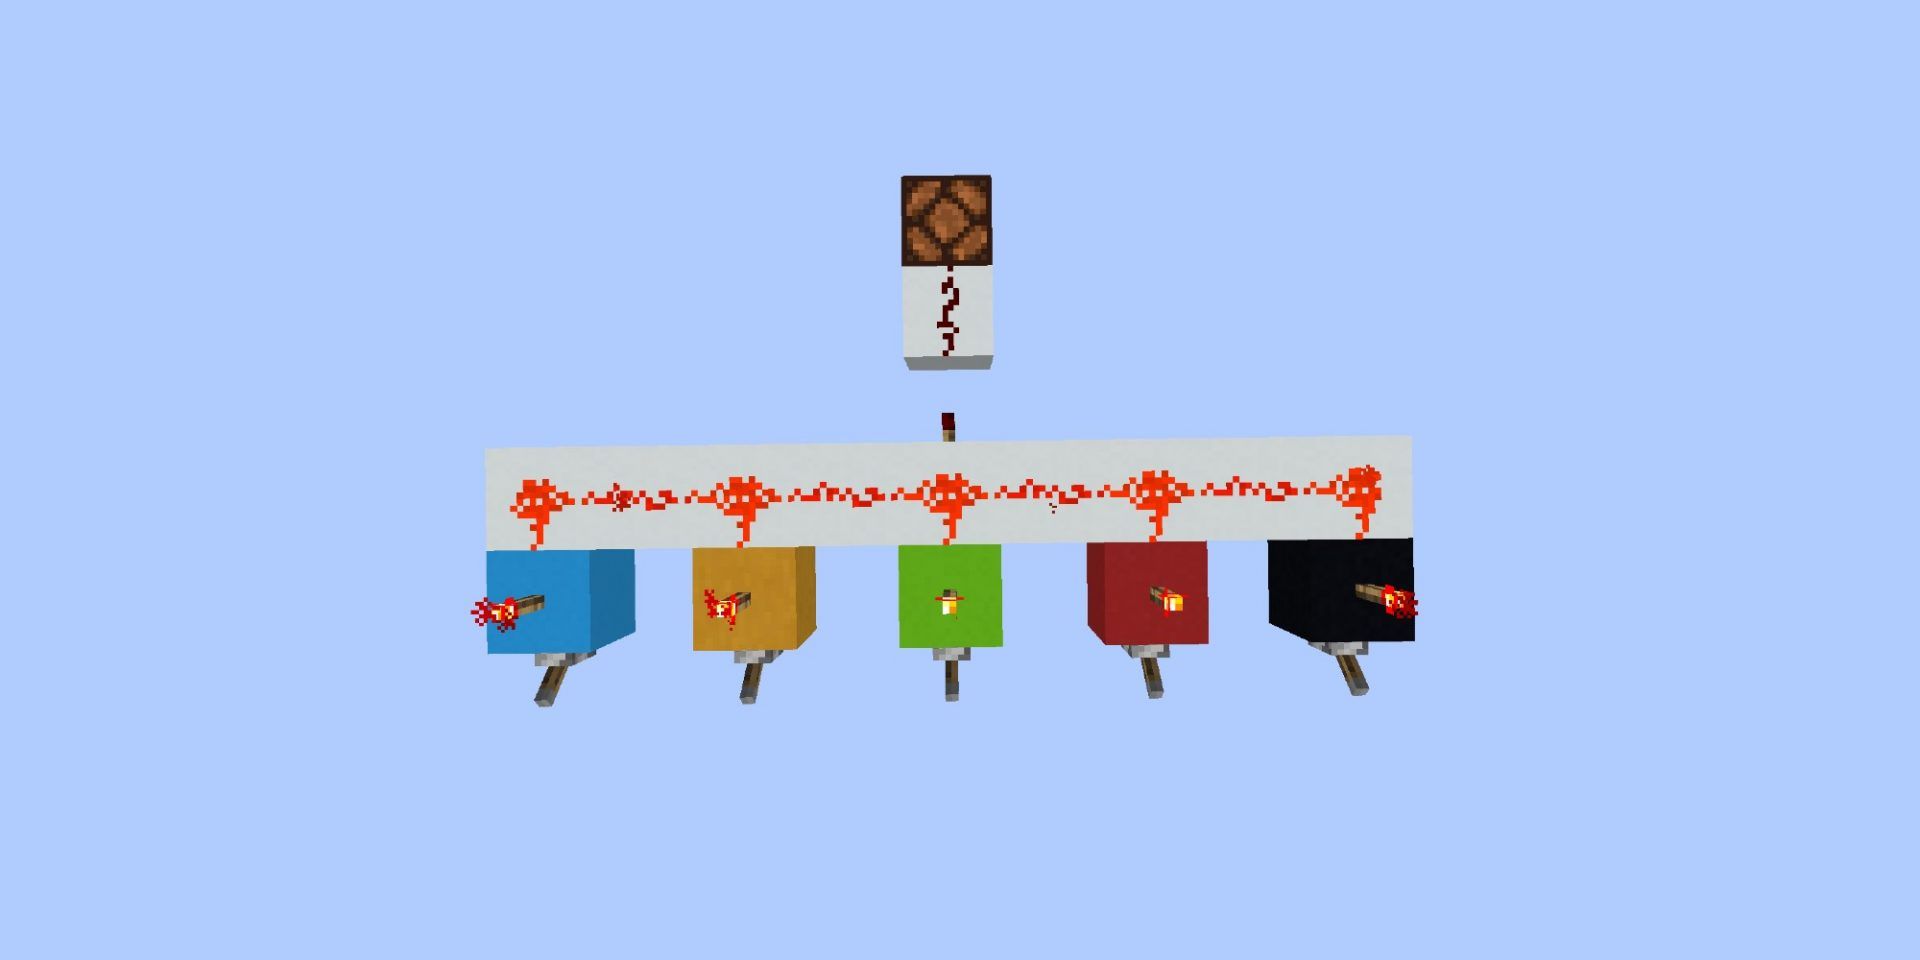 Minecraft - AND gate with five inputs